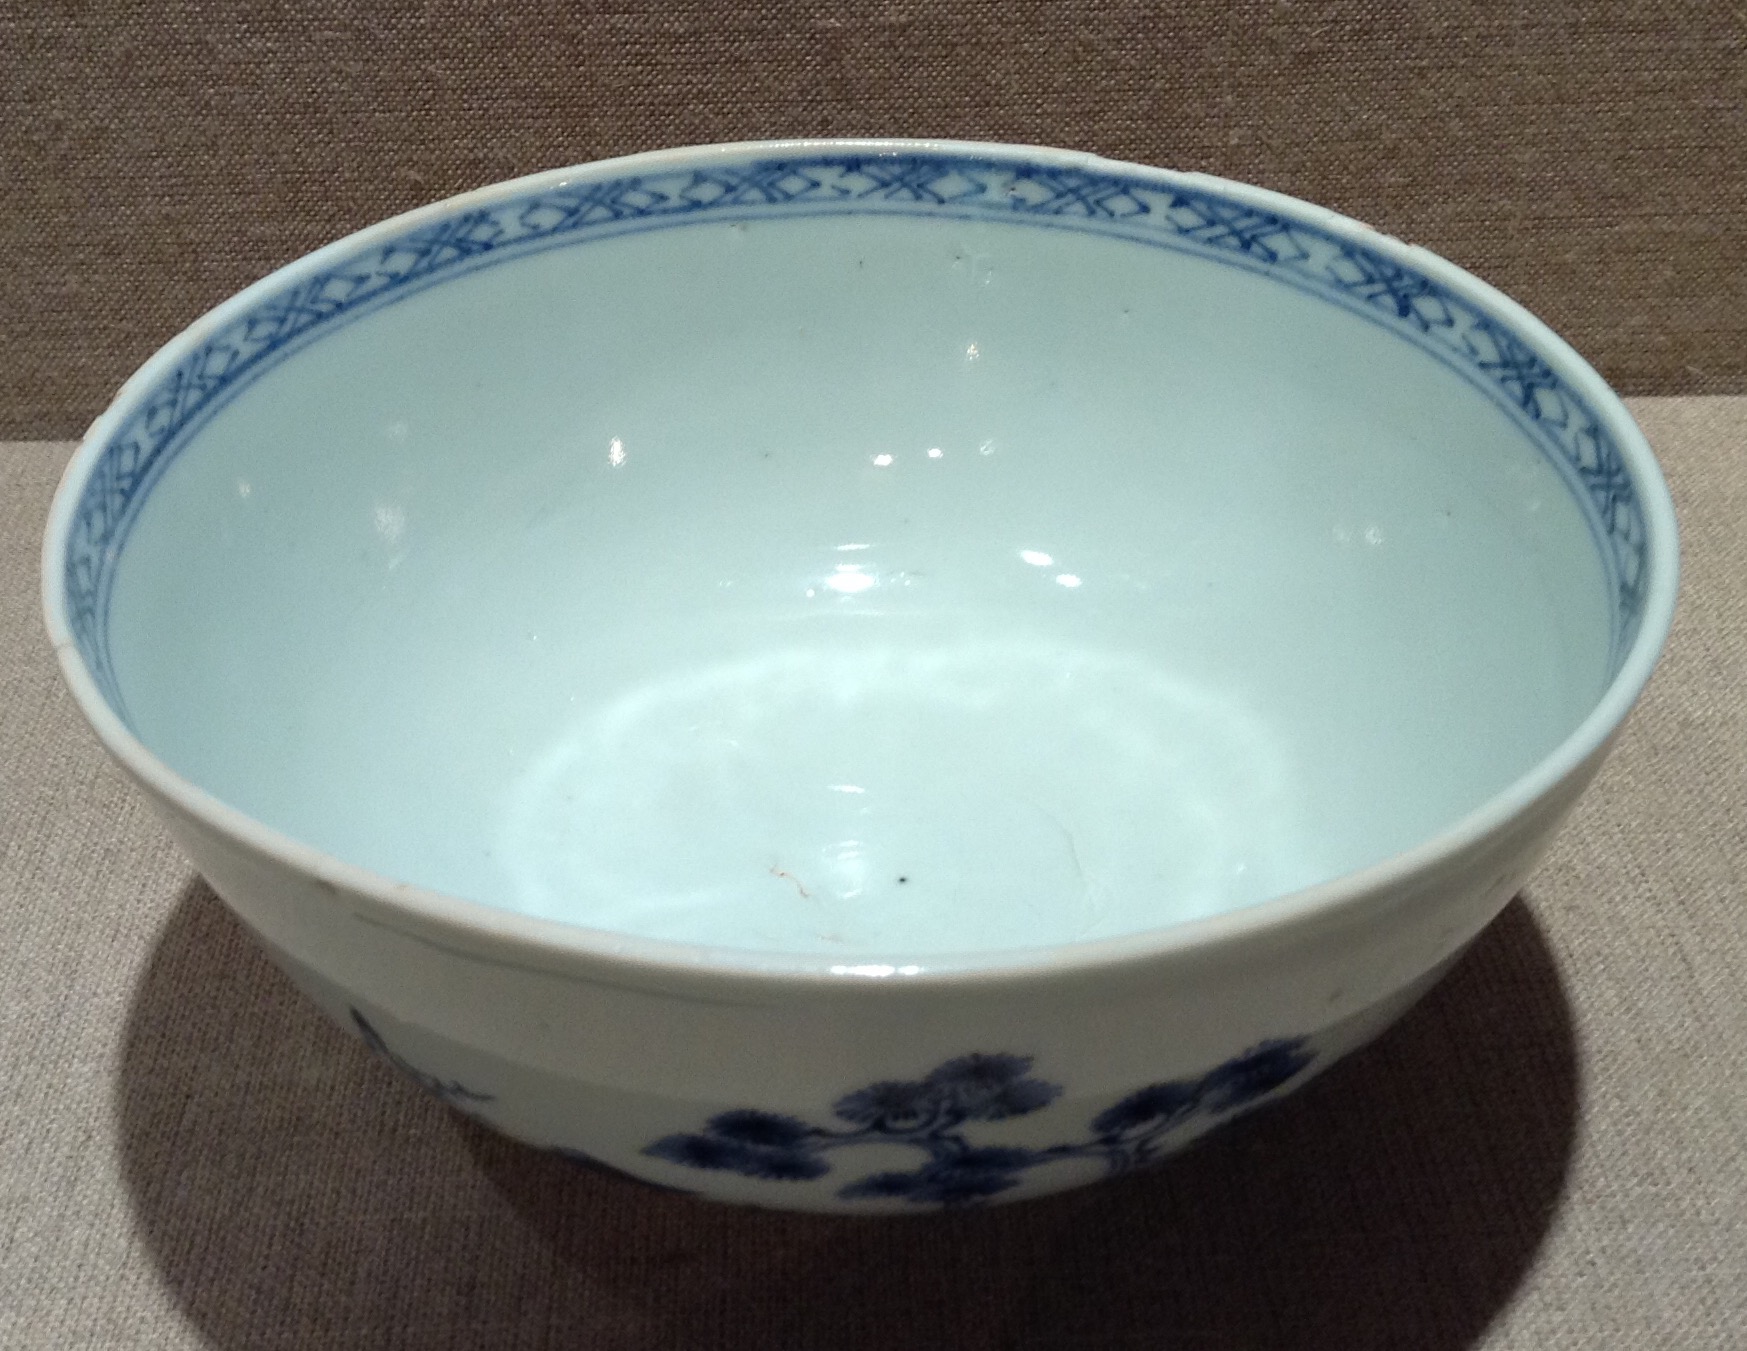 NANKING CARGO, AN 18TH CENTURY CHINESE PORCELAIN BOWL Hand painted in underglaze blue and - Image 4 of 5